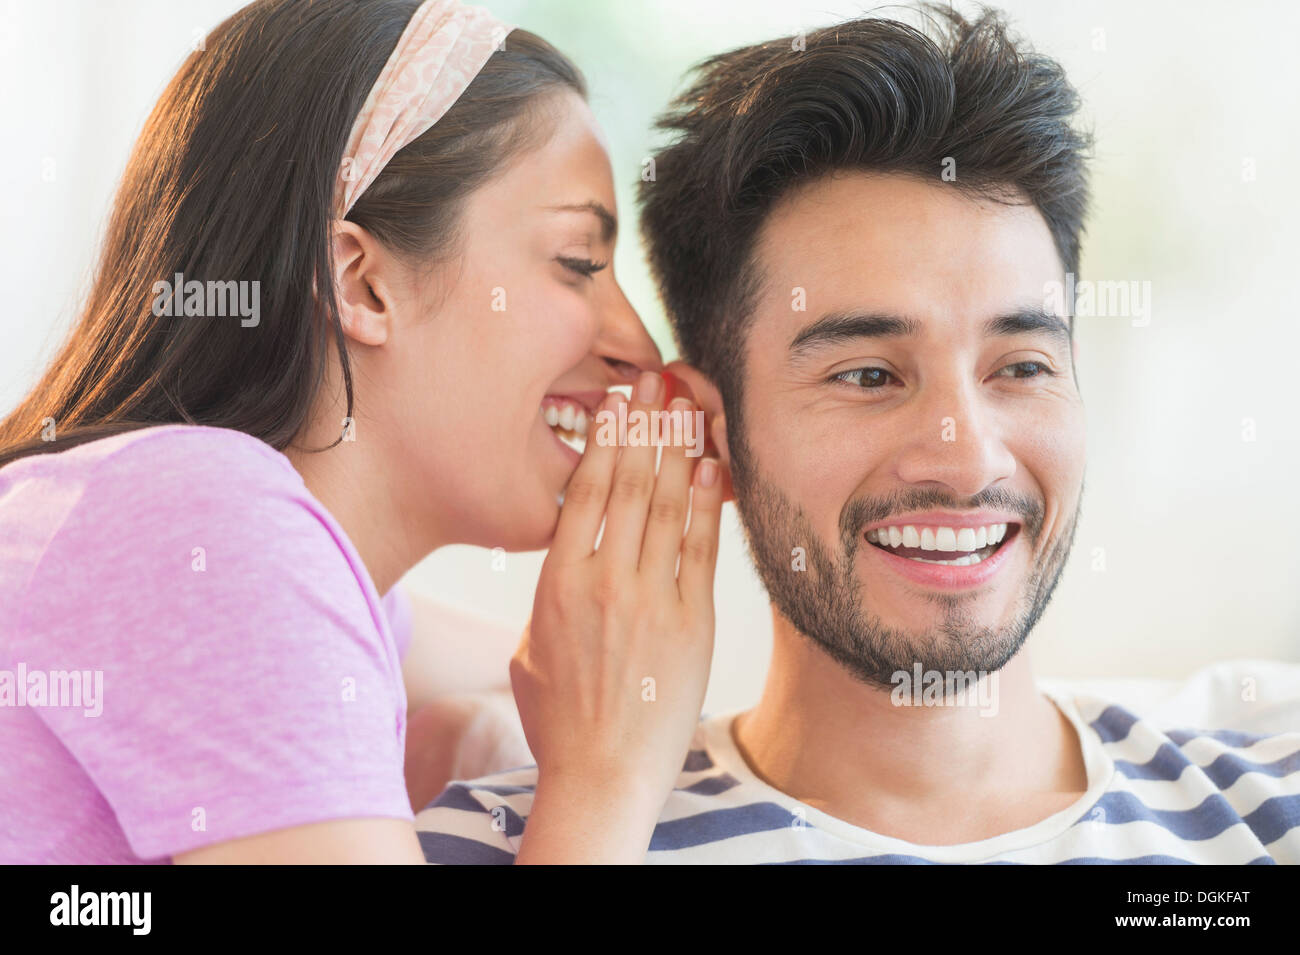 Woman whispering to man's ear Stock Photo